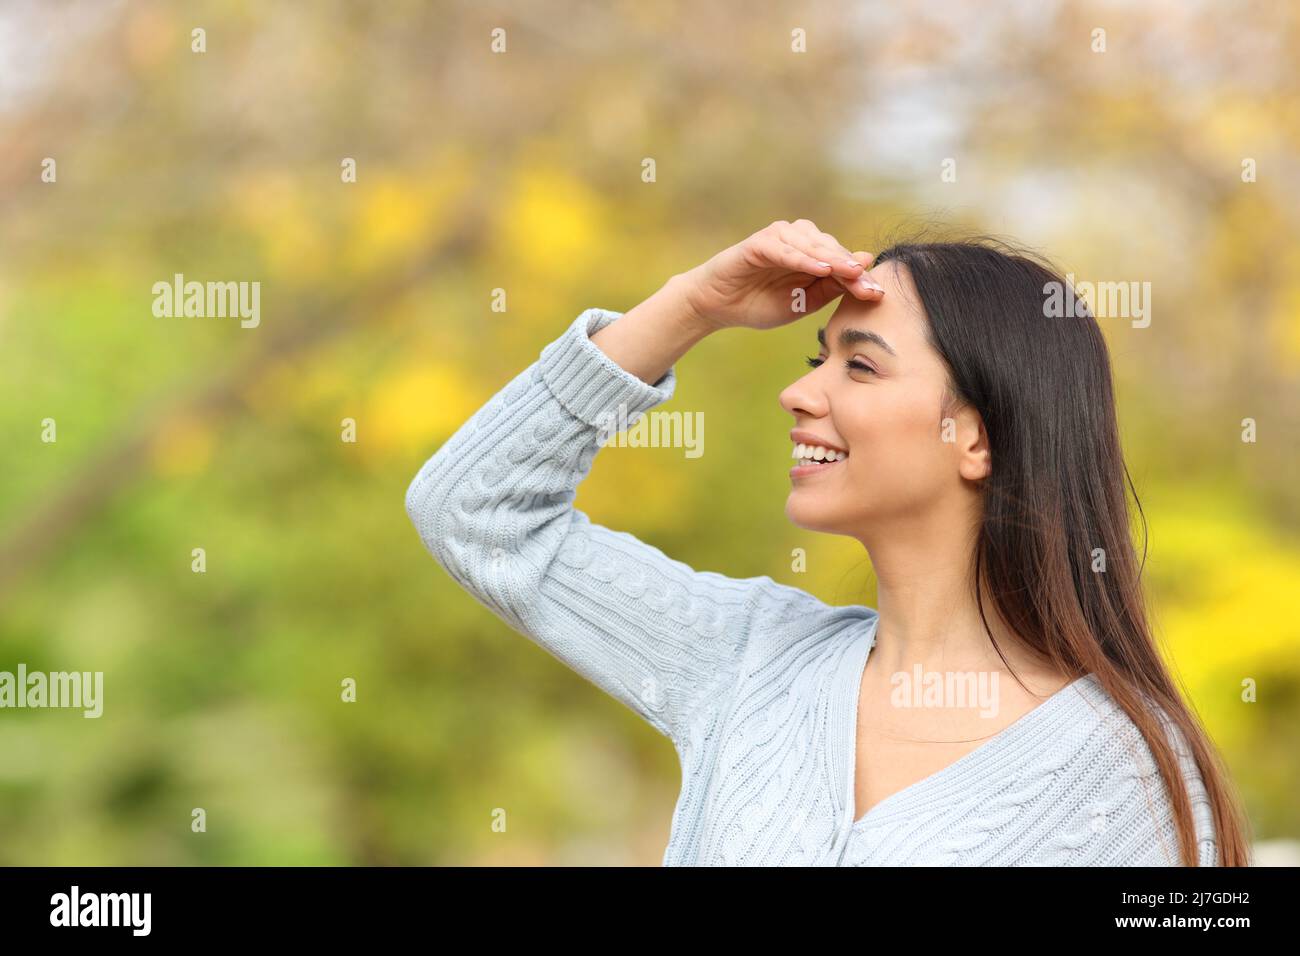 Happy woman searching with hand on forehead standing in a park Stock Photo